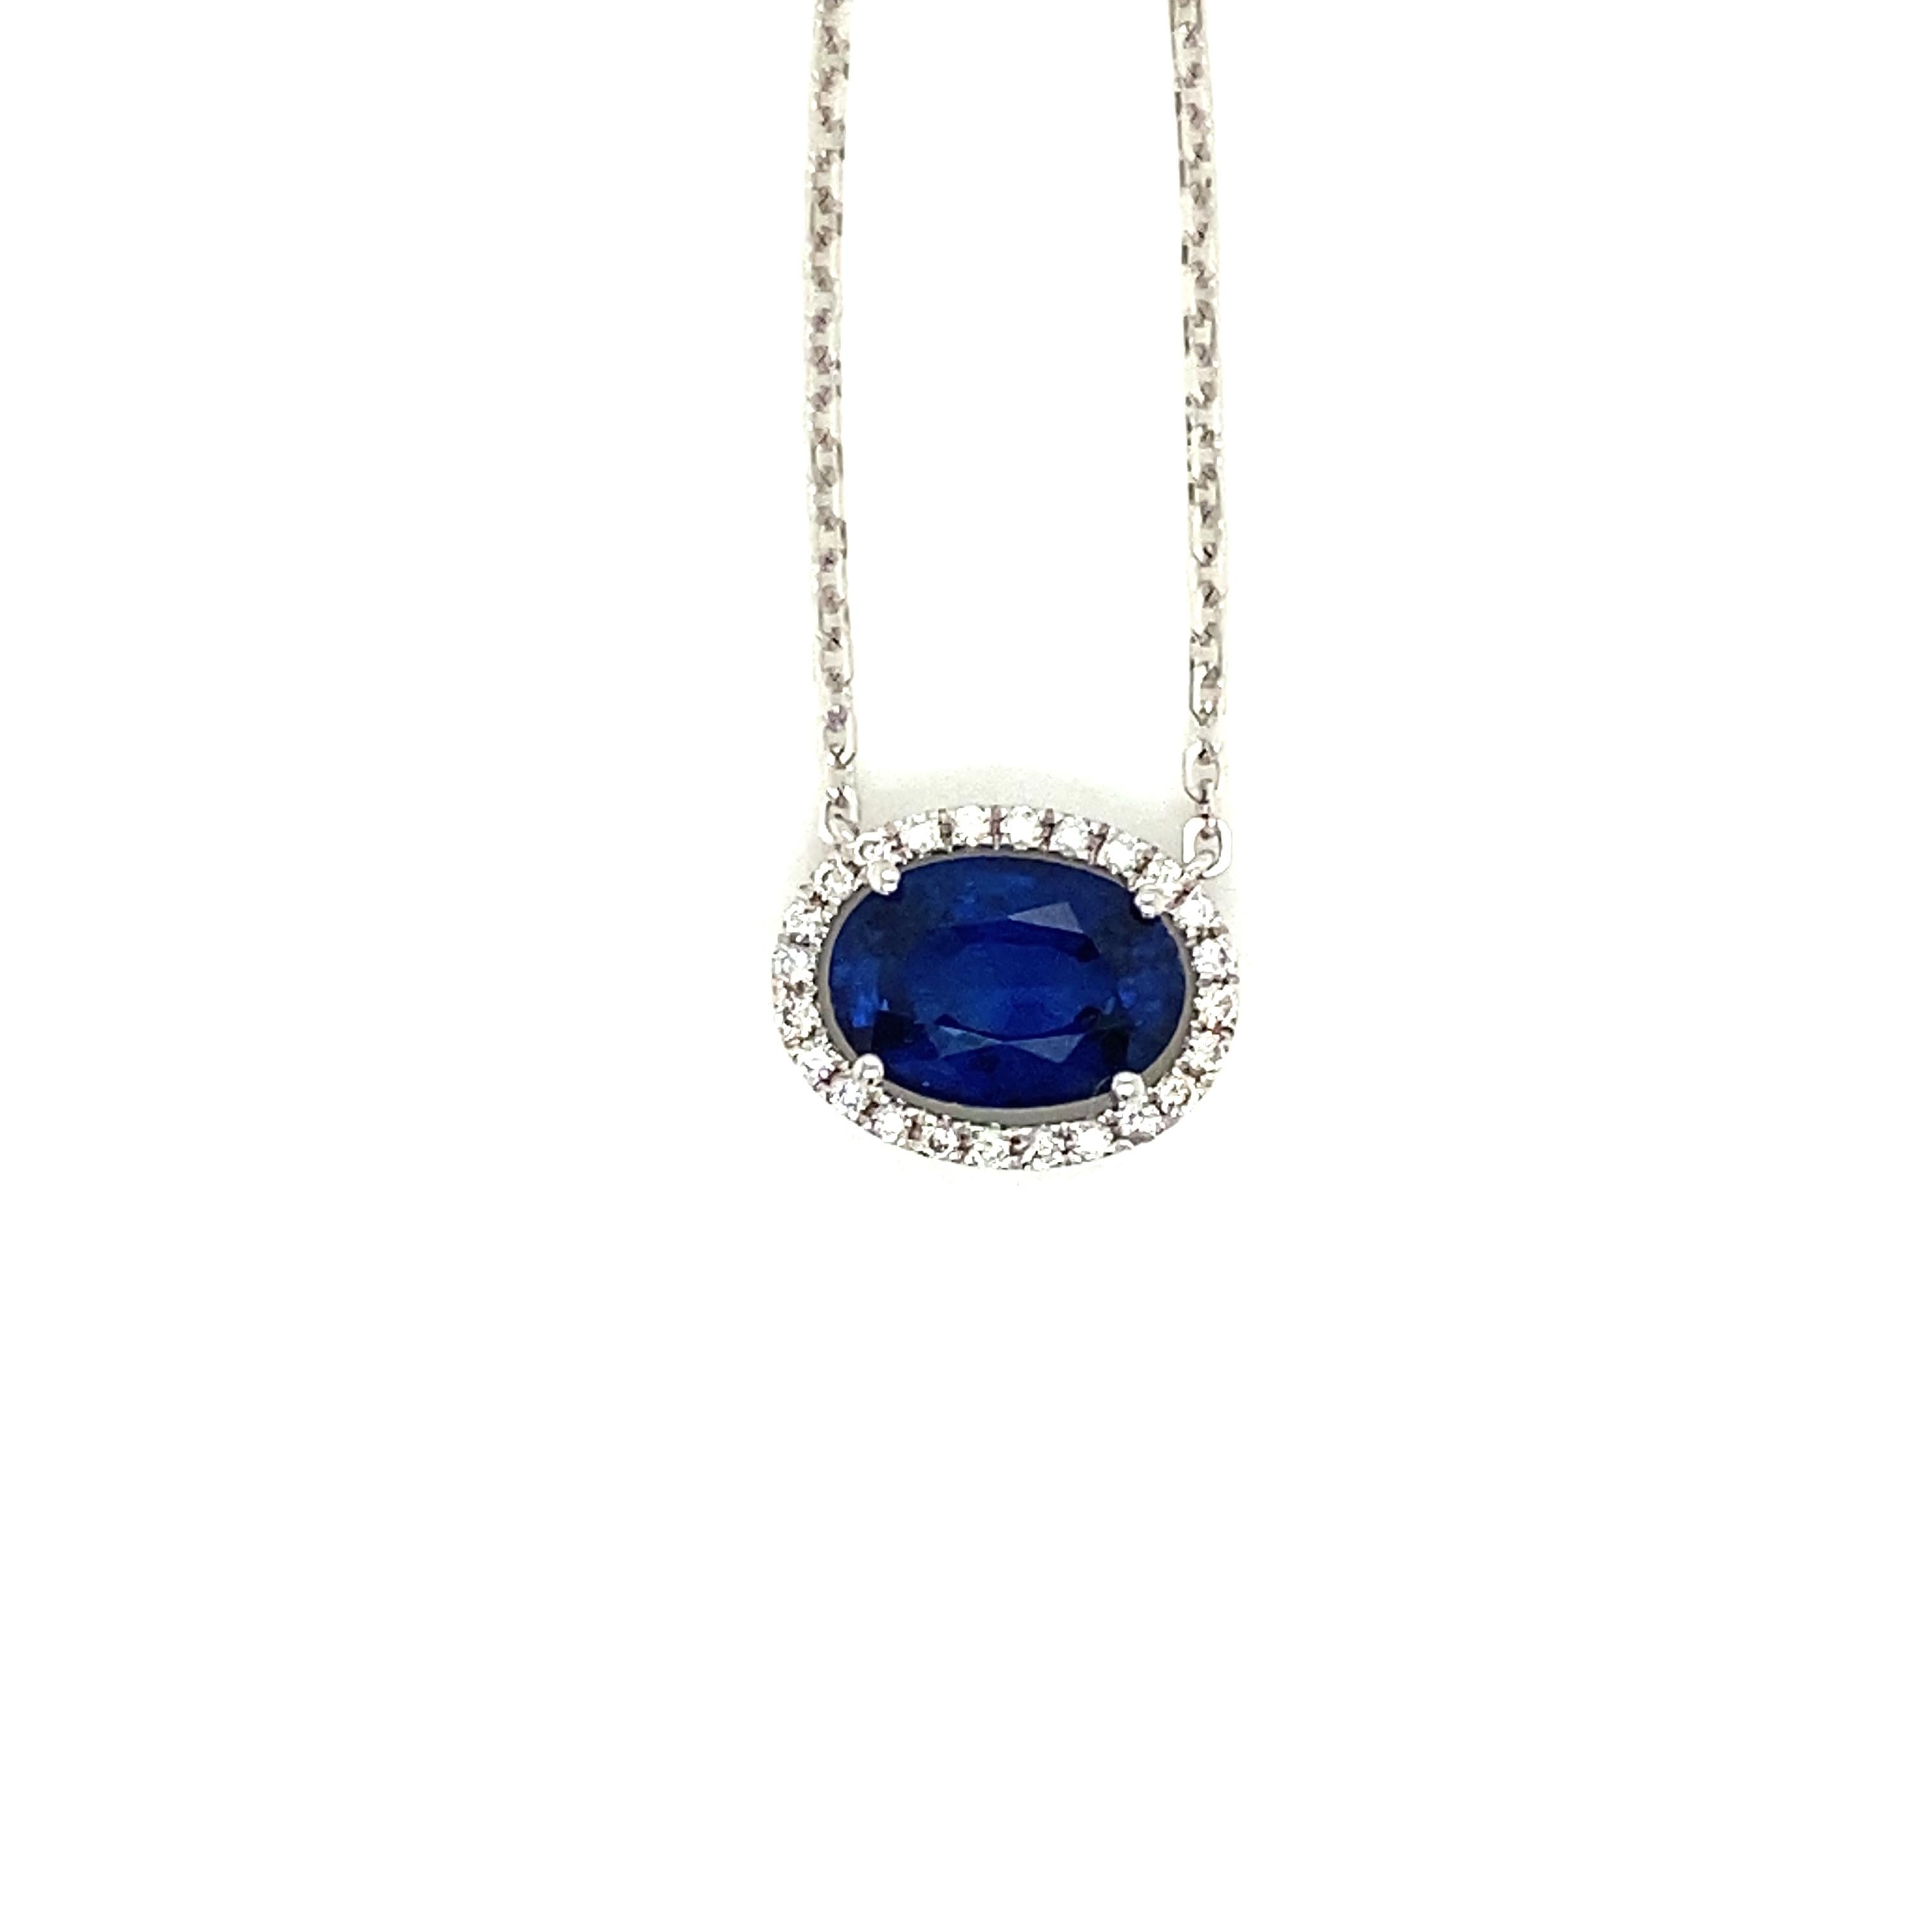 2.29 Carat Oval-Cut Vivid Blue Sapphire and White Diamond Pendant Necklace:

A beautiful pendant necklace, it features a 2.29 carat oval-cut vivid blue sapphire in the centre surrounded by a halo of white round-brilliant cut diamonds weighing 0.15